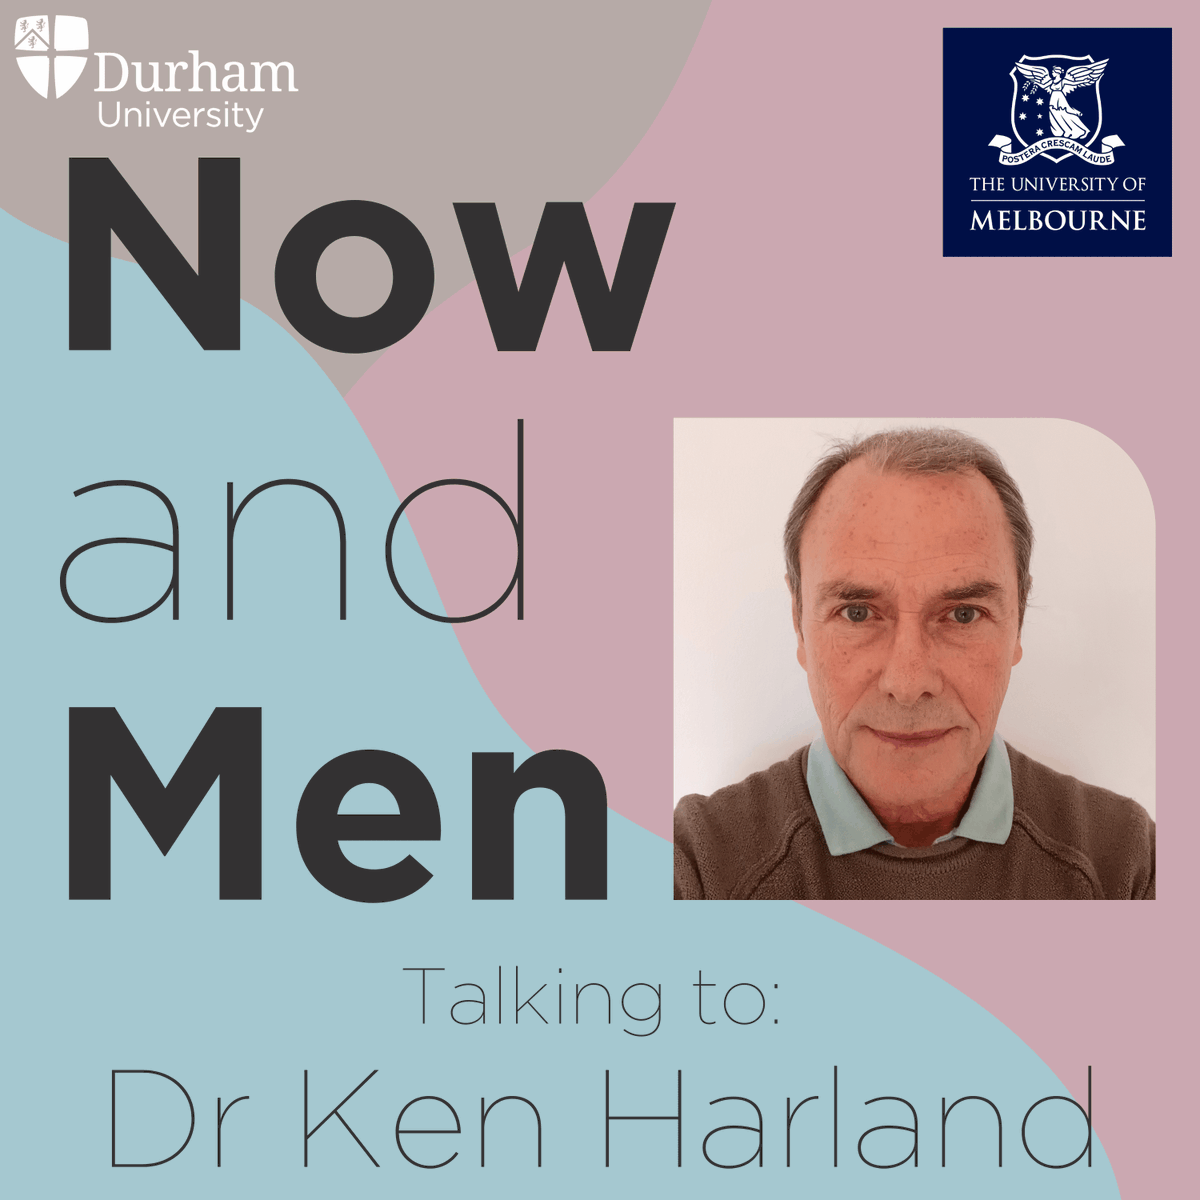 Ep 40 of #NowandMen is out today! We talk to Dr Ken Harland from @UlsterUniCYW about his experience of working with boys in Northern Ireland for over 35 years, in a society which has transitioned from a highly masculinised conflict towards peace-building: now-and-men.captivate.fm/episode/ken-ha…